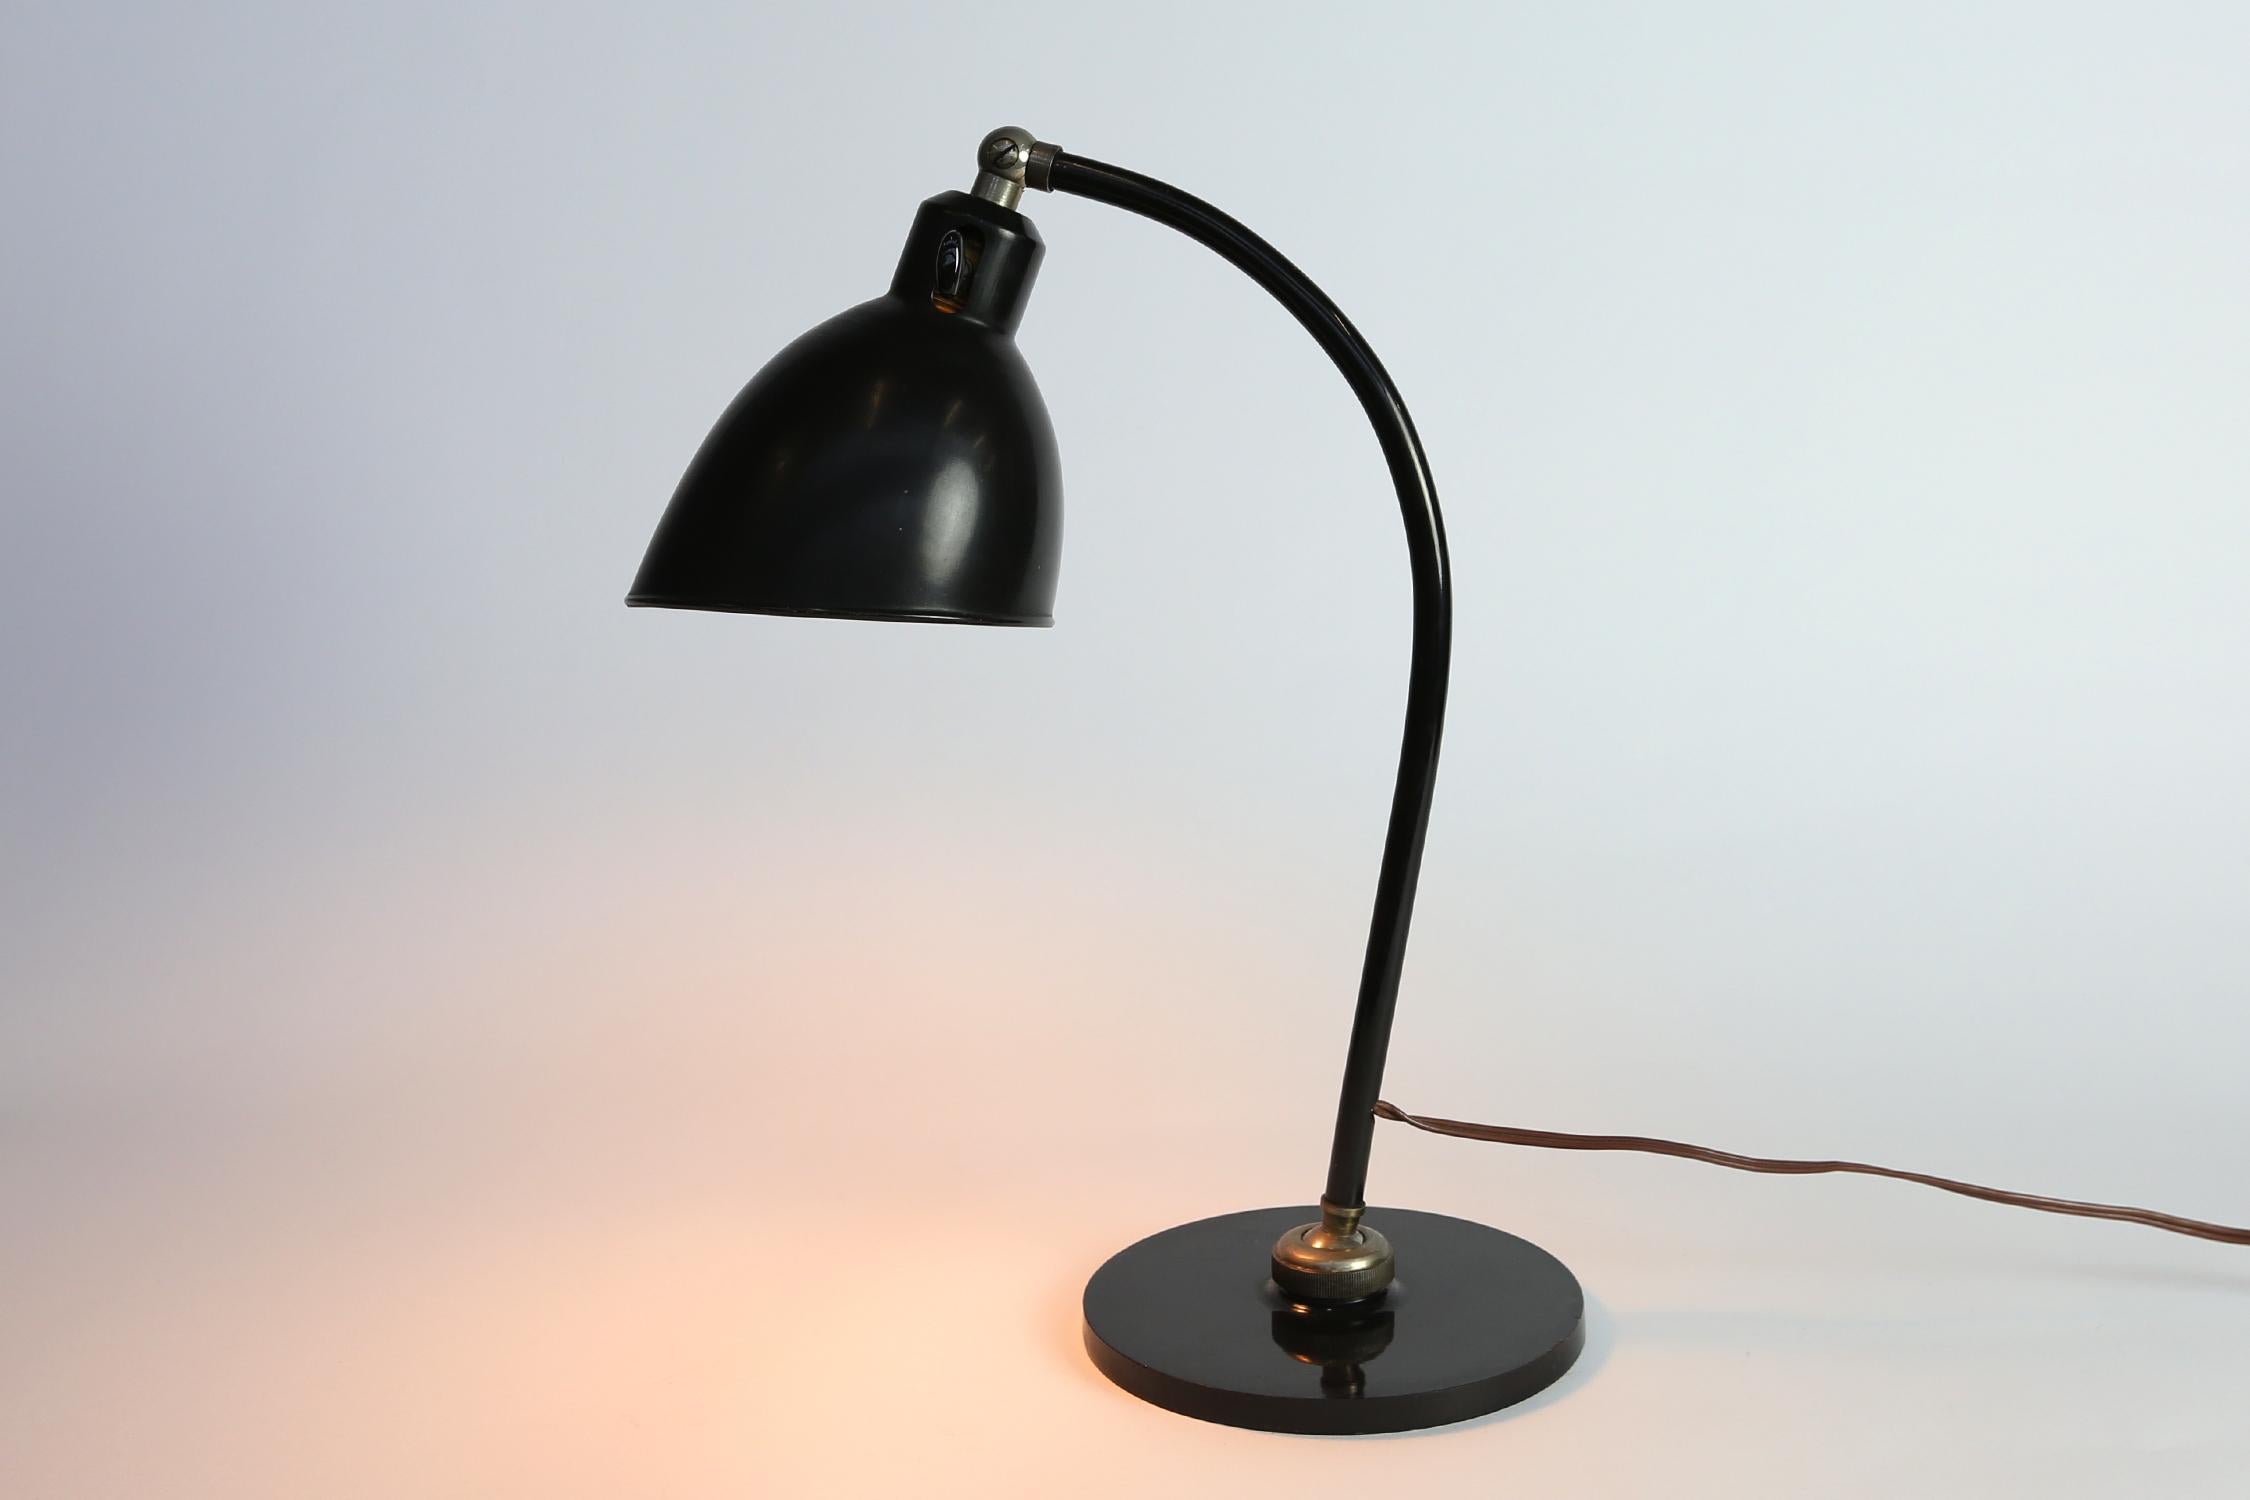 A fine and original Christian Dell light. Black painted metal with adjustable arm and base. Marked Polo Popular on the base, in working condition.